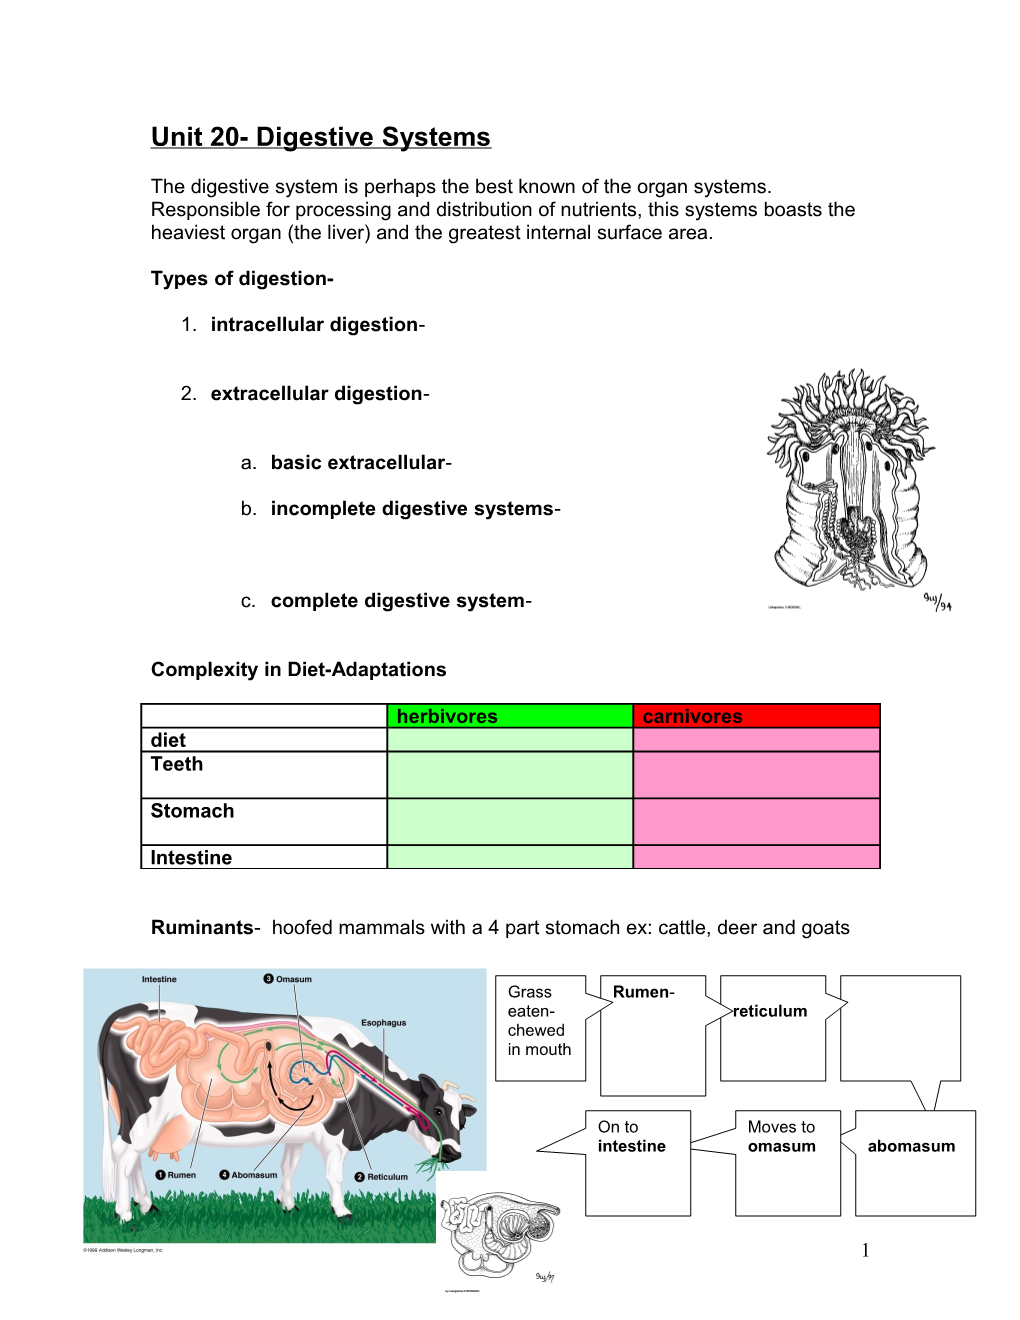 Unit 20- Digestive Systems